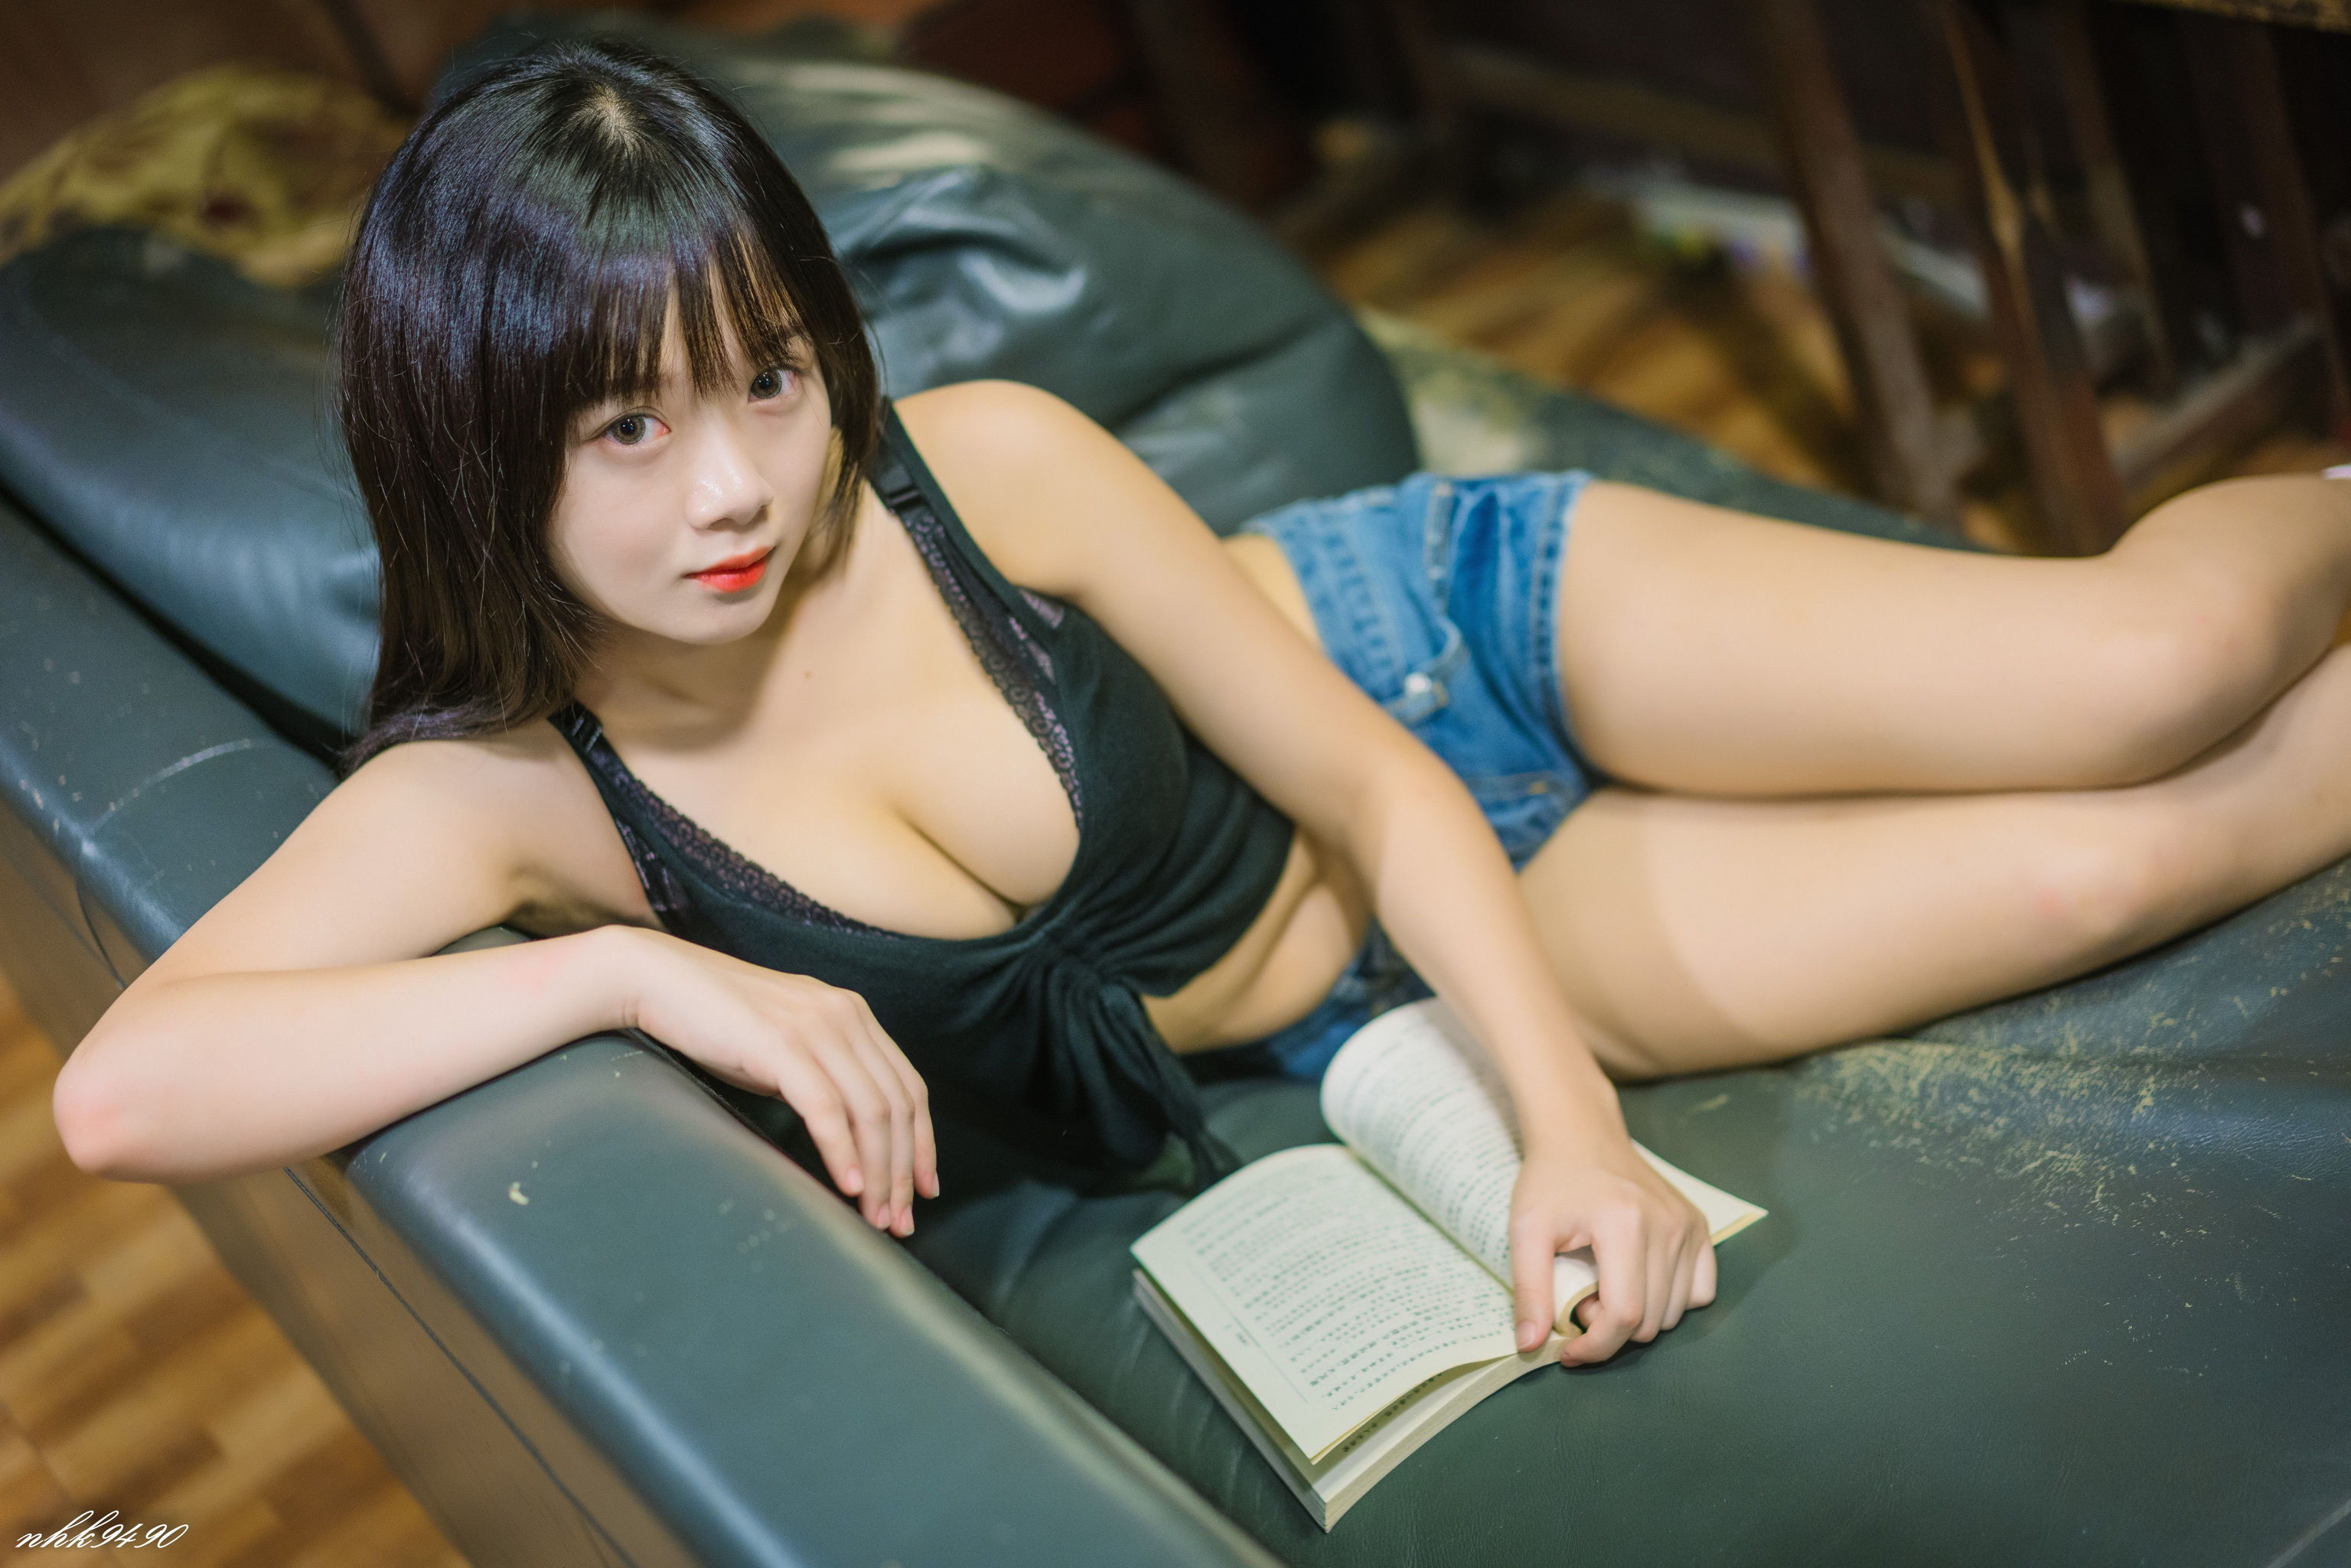 People 3072x2049 Asian model women Taiwanese black hair long hair short tops black top jean shorts depth of field cleavage library bookstore brunette thighs books women indoors